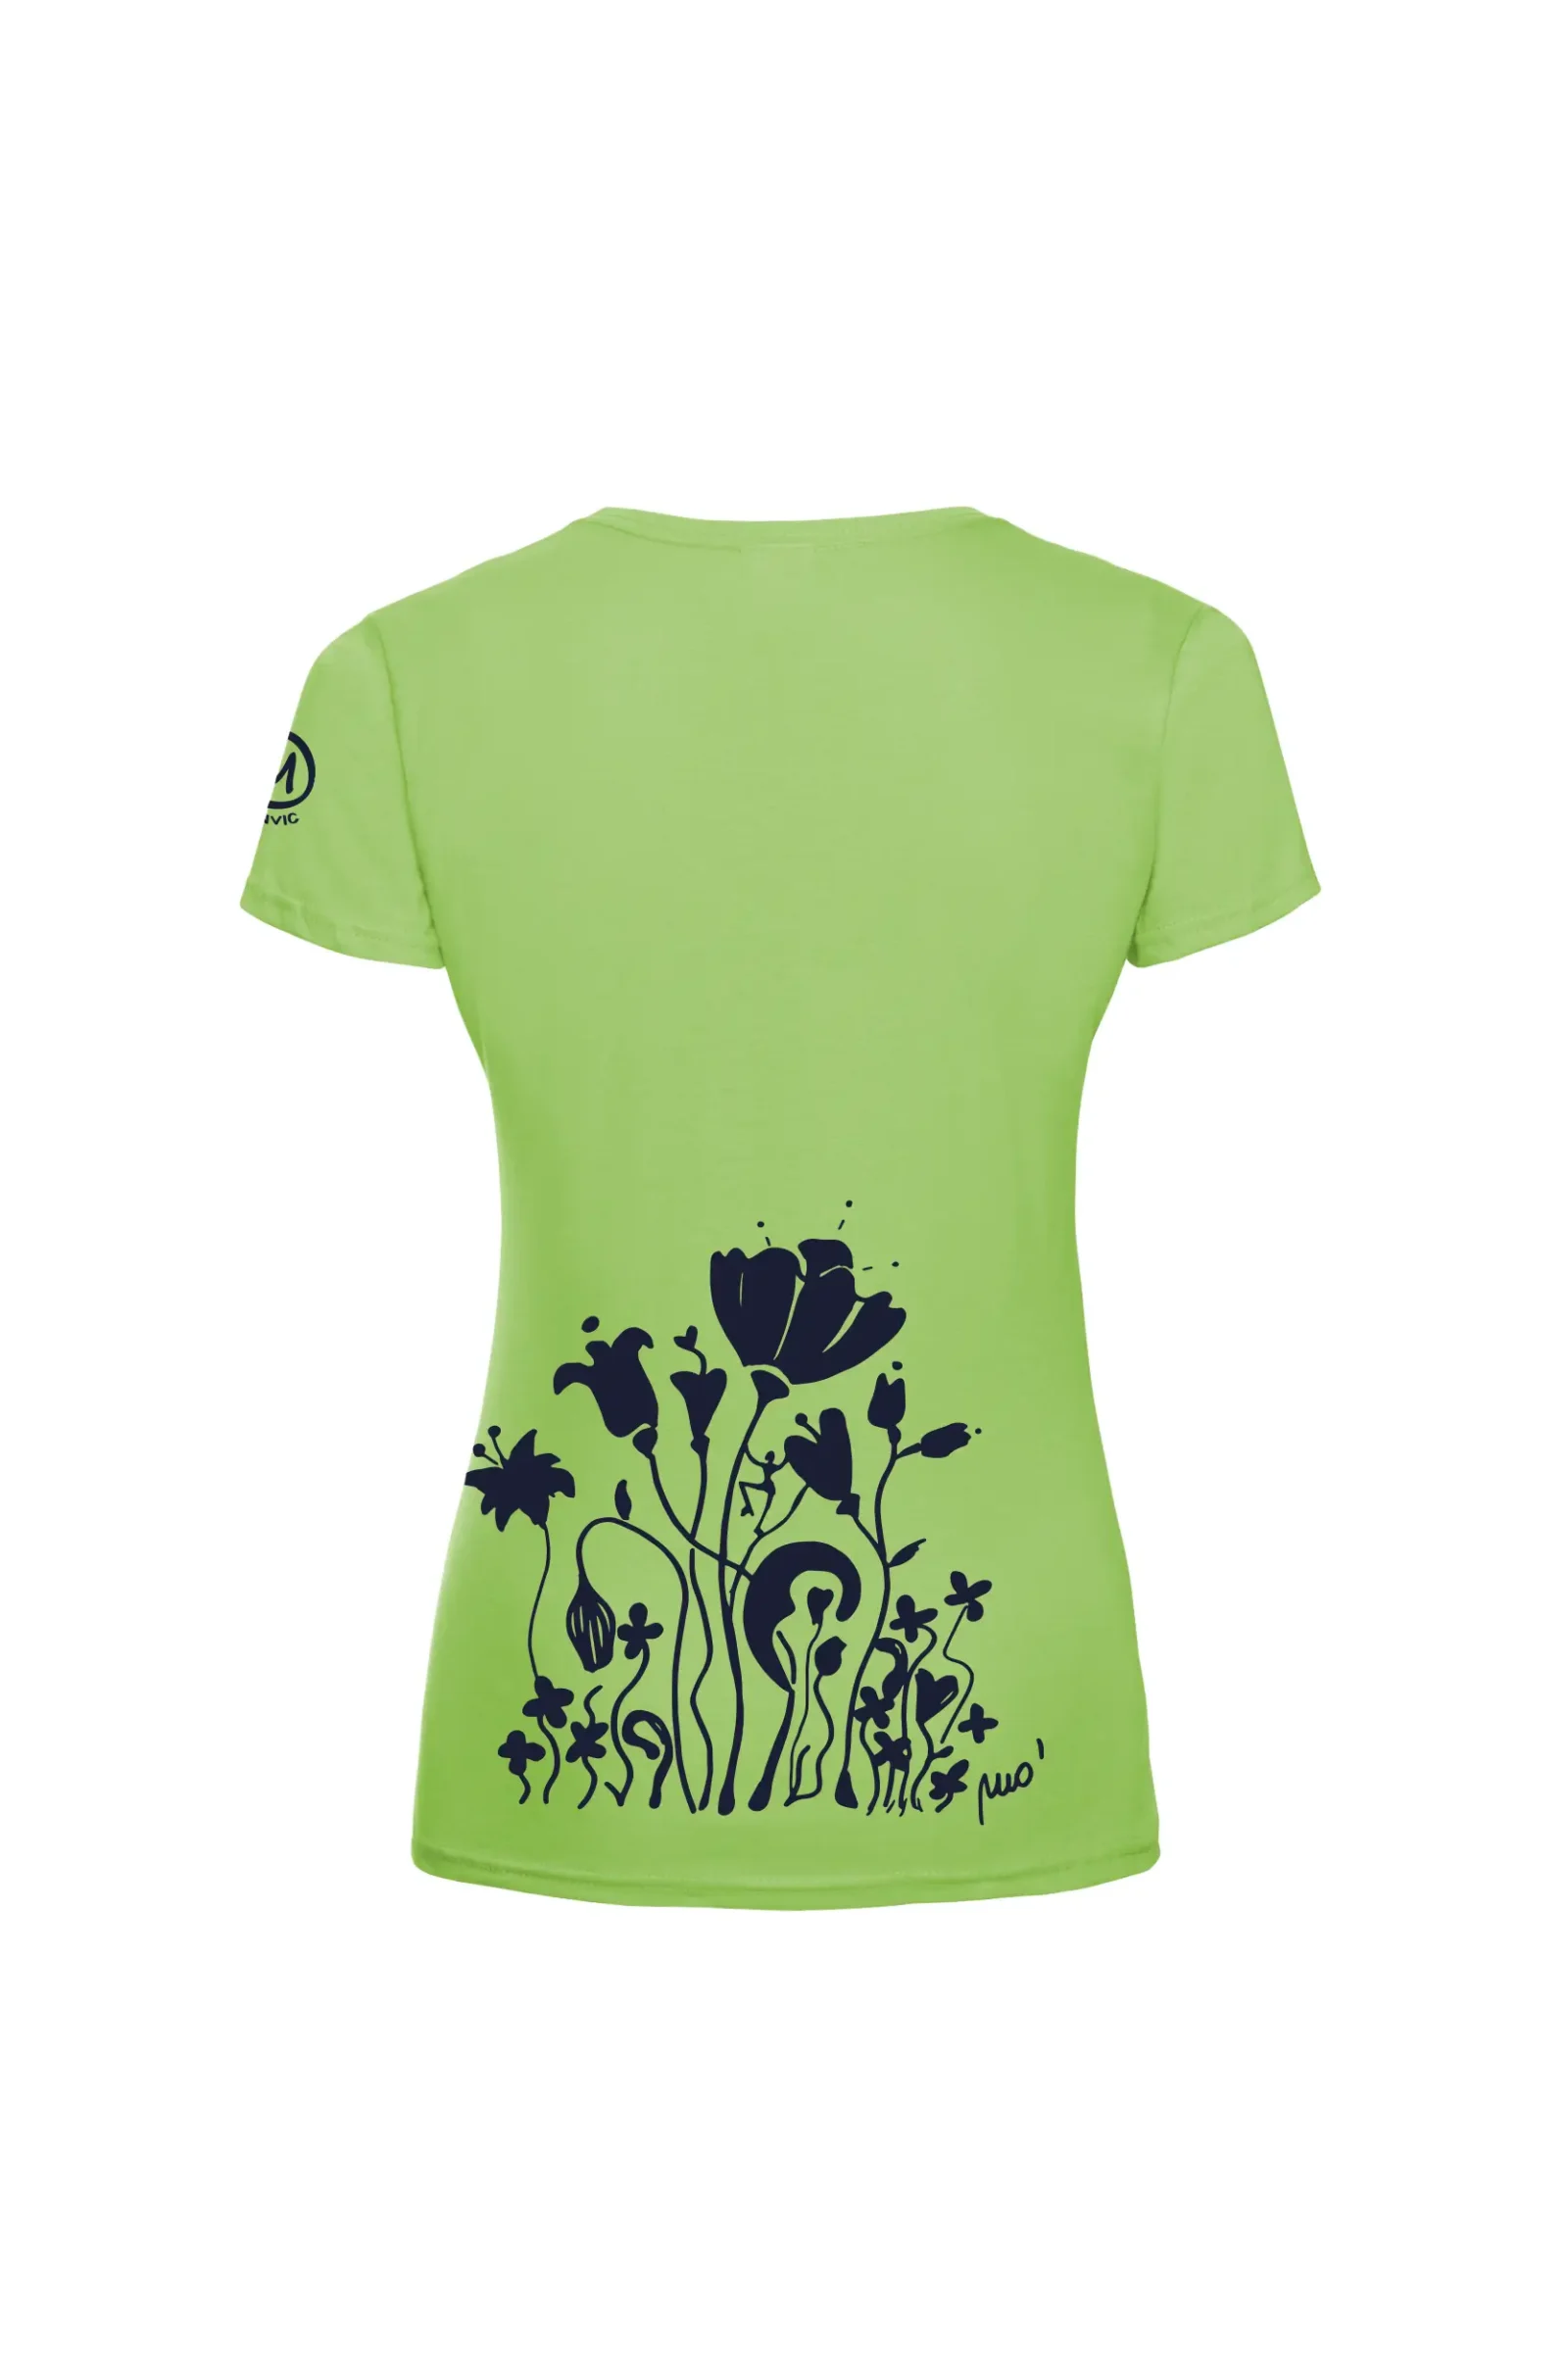 Women's climbing t-shirt - lime green cotton - "Forest" graphics - SHARON by MONVIC